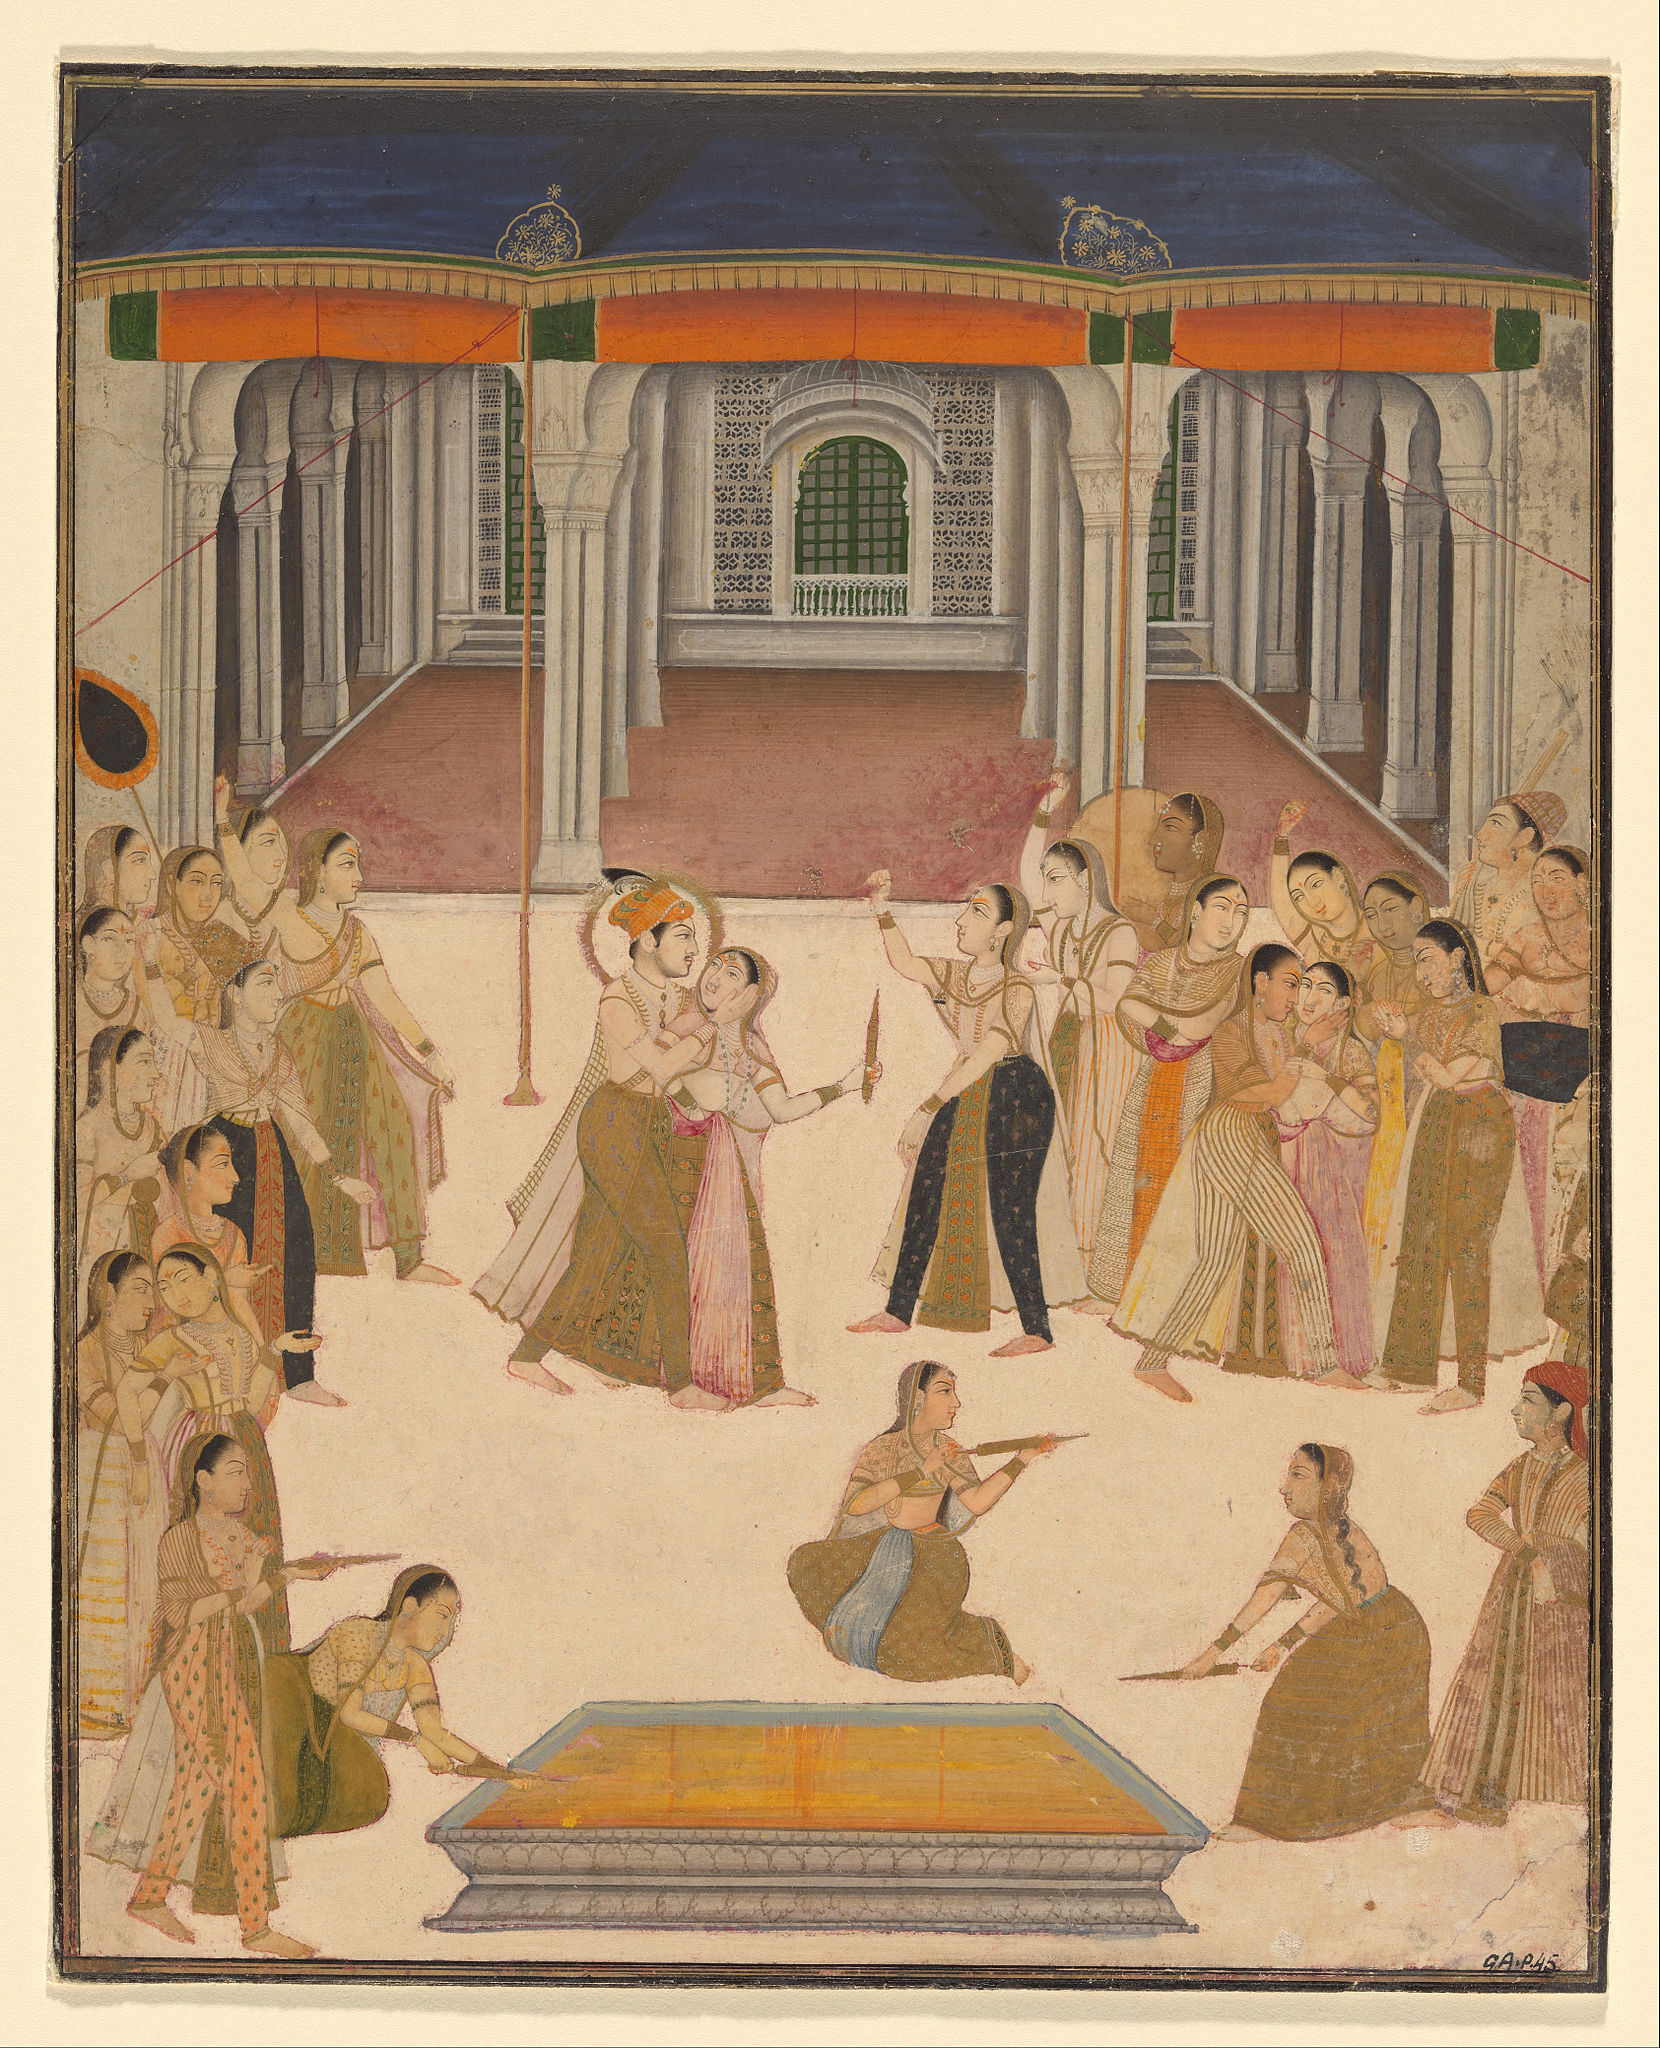 <br><br><hr> In 20-Holi-Pictures: Celebration through the Ages